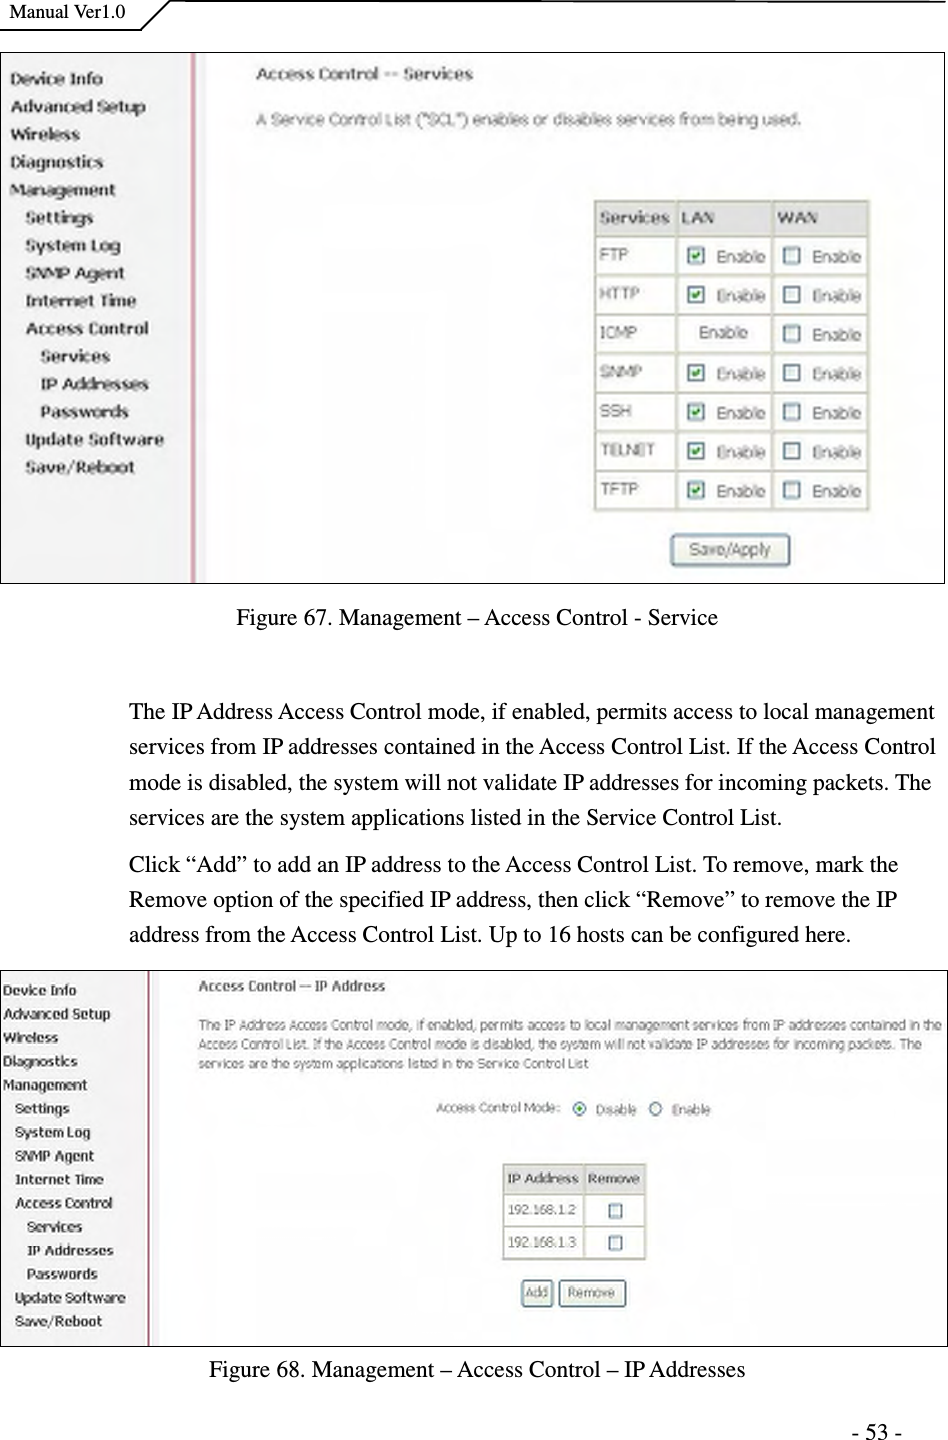    Manual Ver1.0                                                                      - 53 -   Figure 67. Management – Access Control - Service  The IP Address Access Control mode, if enabled, permits access to local management services from IP addresses contained in the Access Control List. If the Access Control mode is disabled, the system will not validate IP addresses for incoming packets. The services are the system applications listed in the Service Control List.   Click “Add” to add an IP address to the Access Control List. To remove, mark the Remove option of the specified IP address, then click “Remove” to remove the IP address from the Access Control List. Up to 16 hosts can be configured here.     Figure 68. Management – Access Control – IP Addresses 